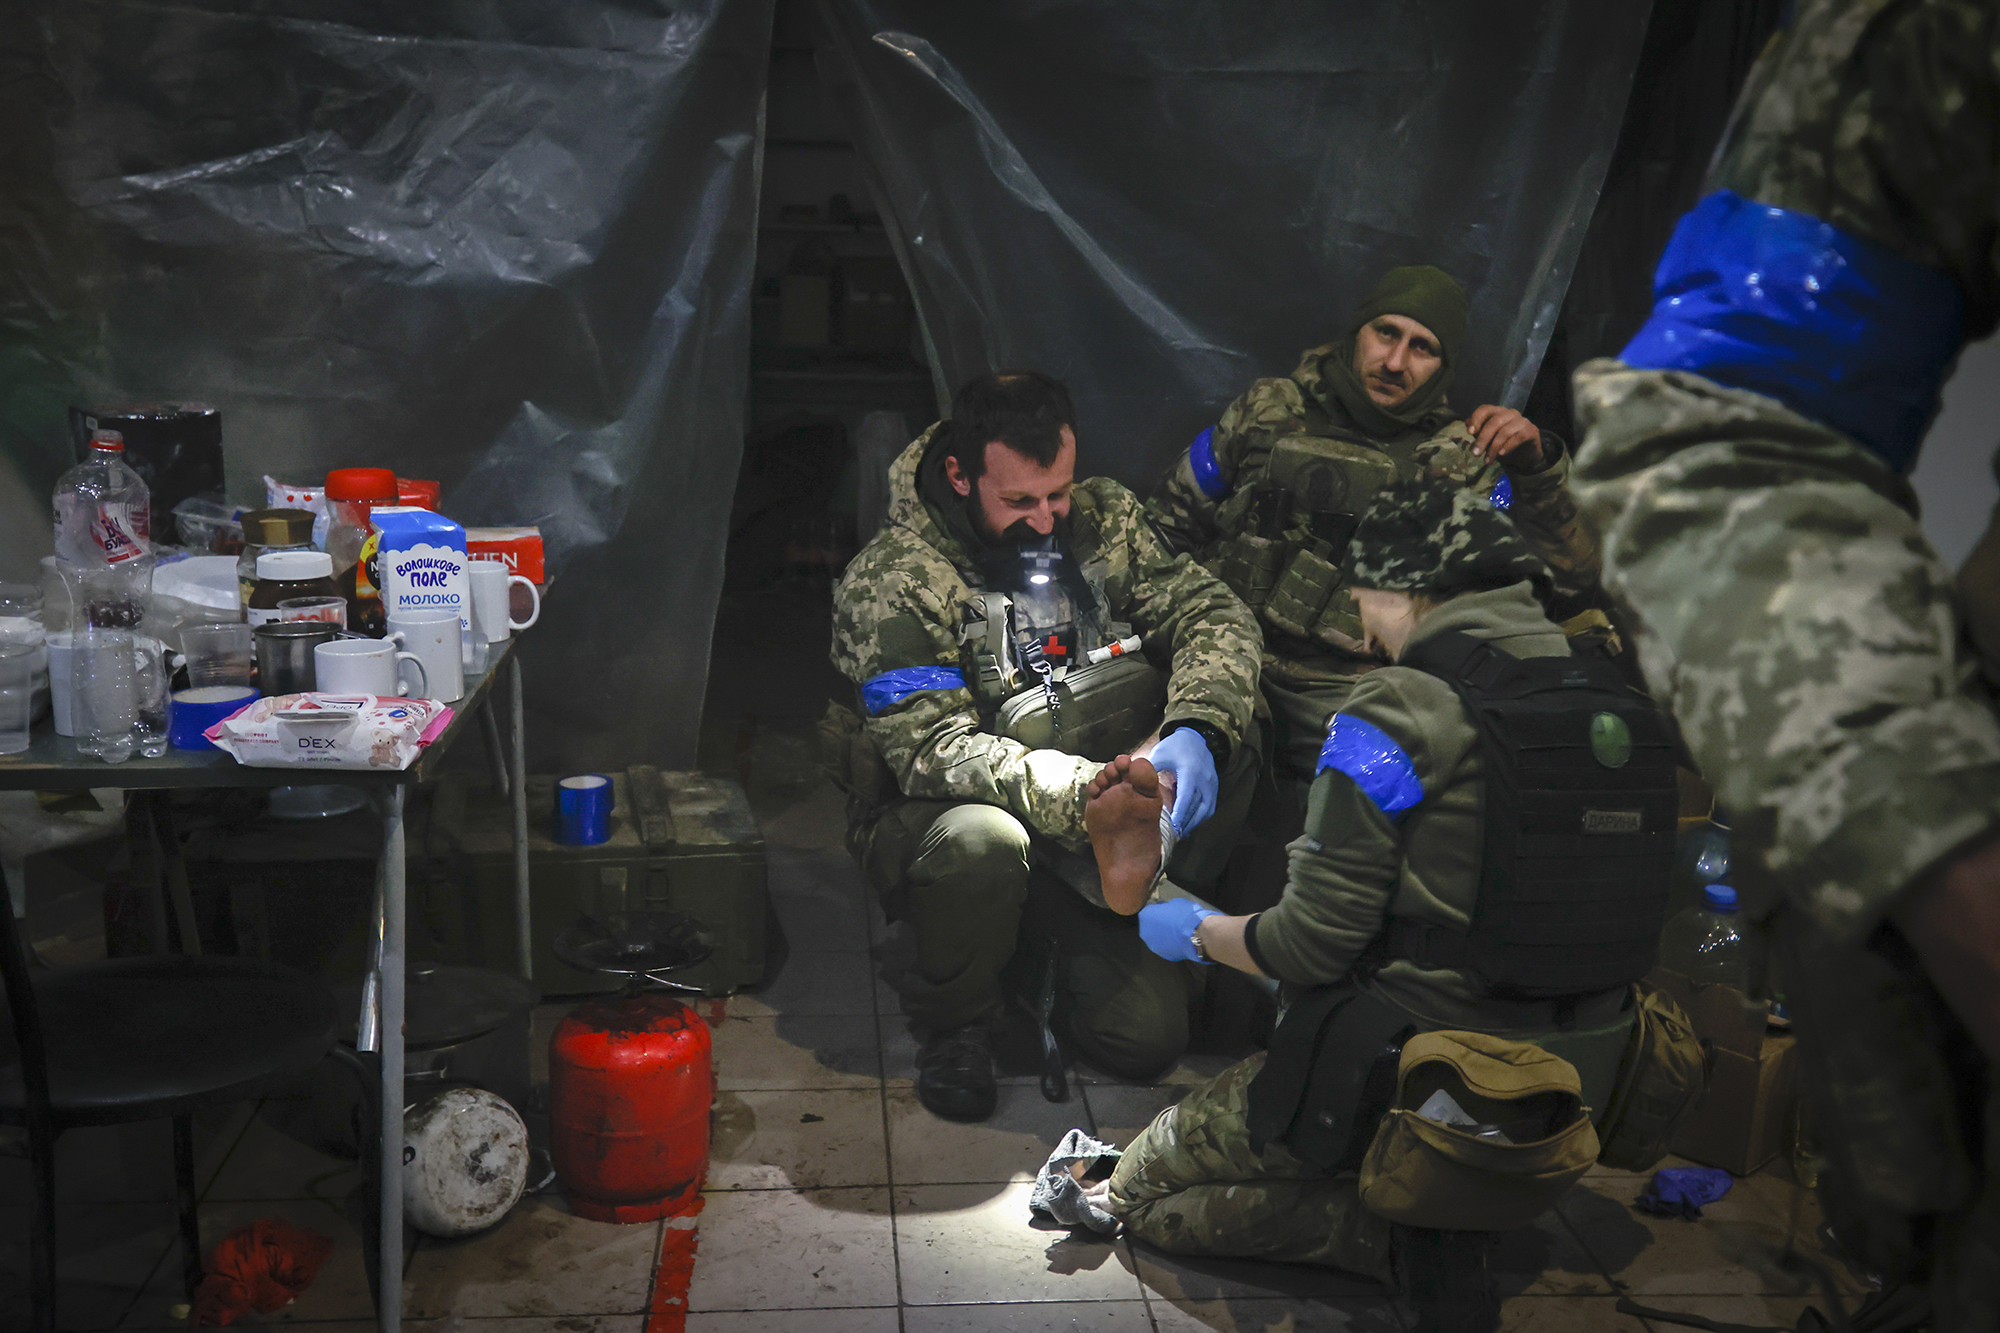 Ukrainian servicemen administer first aid to a wounded soldier in a shelter in Soledar, the site of heavy battles with Russian forces in the Donetsk region, Ukraine, Sunday, Jan. 8, 2023. (AP Photo/Roman Chop)